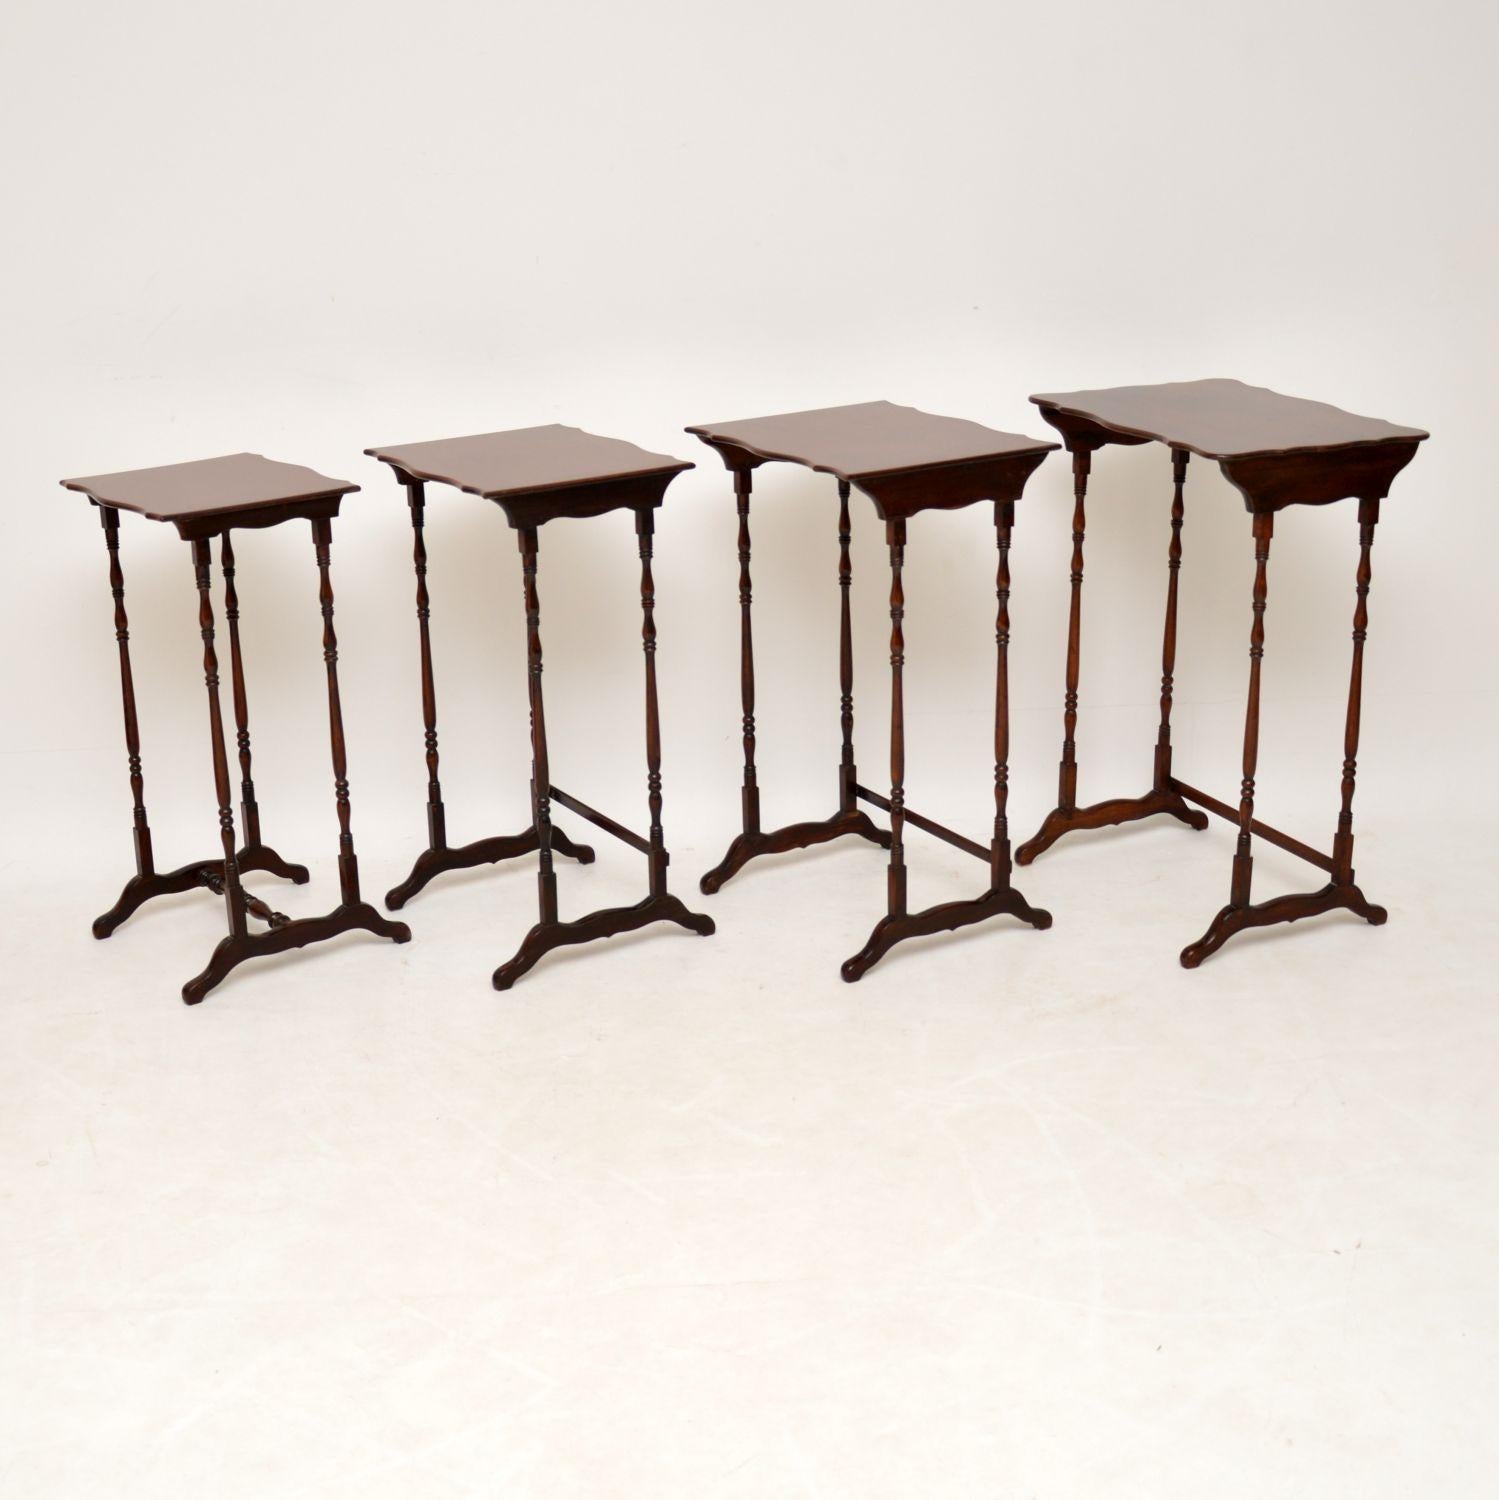 Antique solid mahogany nest of four tables in excellent condition, dating from the 19th century. The tops are shaped all the way around and the tall legs are beautifully turned. There are cross stretchers at the base which help keep them more